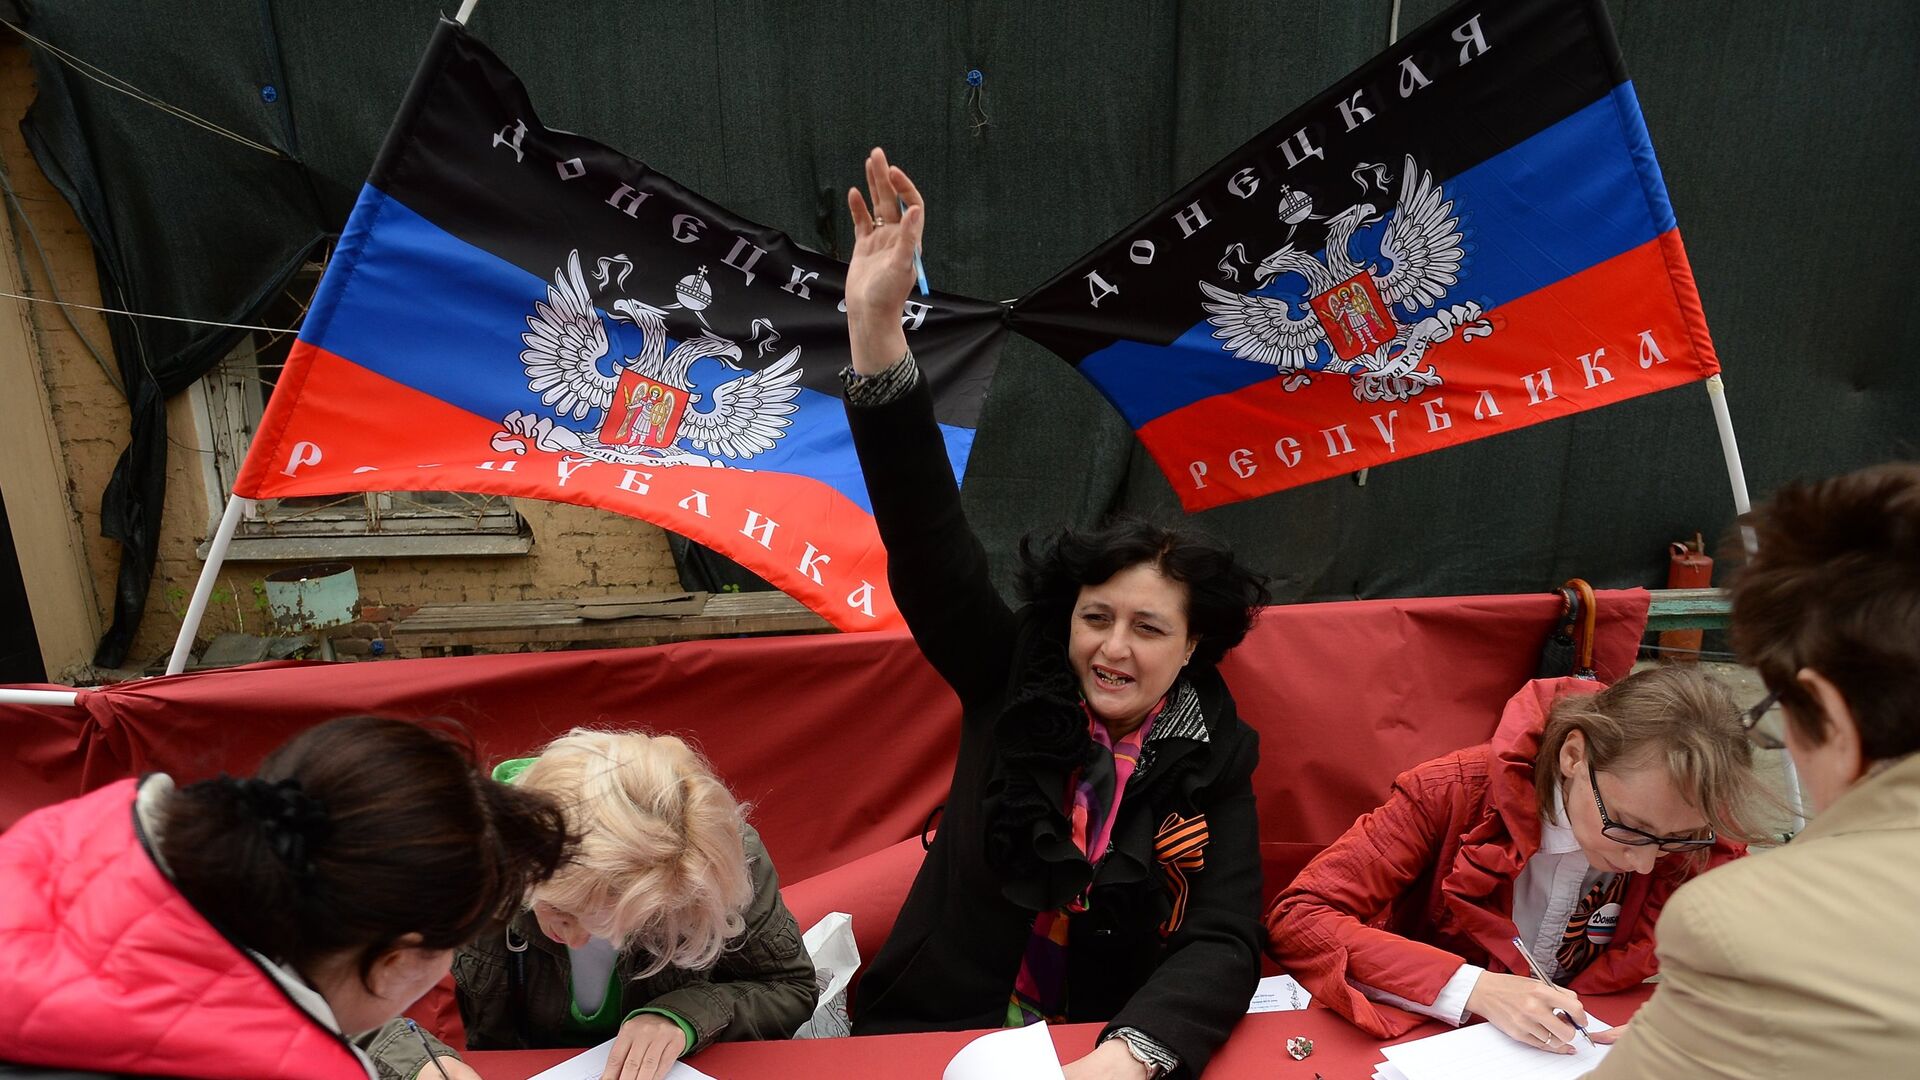 Donbass residents vote in the referendum on the status of the self-proclaimed Donetsk People's Republic at a polling station in Moscow - Sputnik International, 1920, 20.09.2022